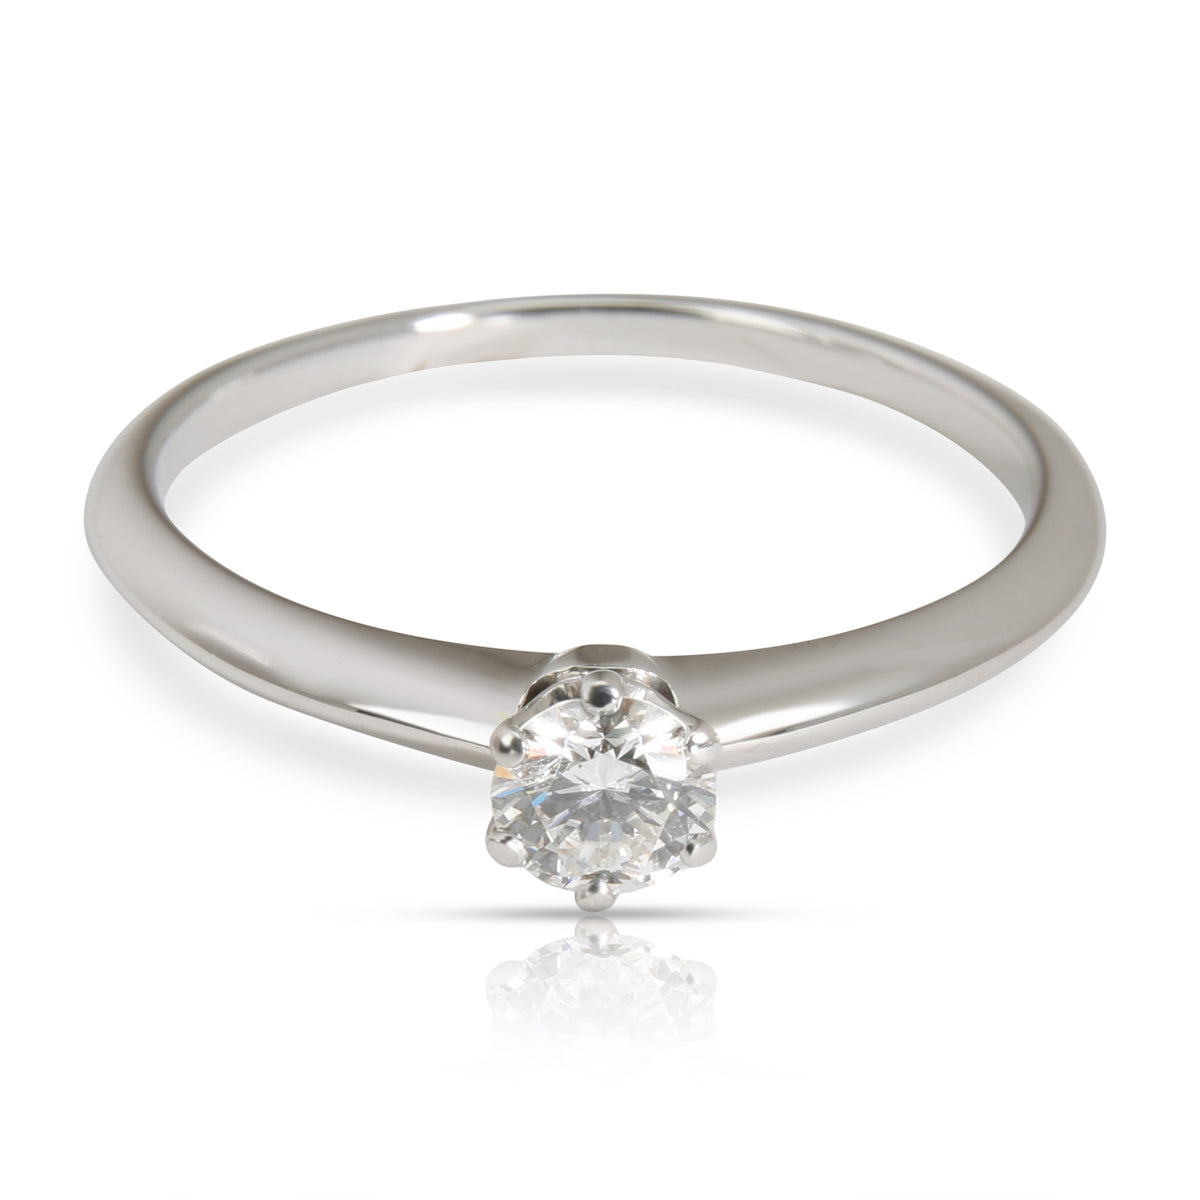 Tiffany & Co. Solitaire Diamond Engagement Ring in Platinum (0.34 ct F/VS2)